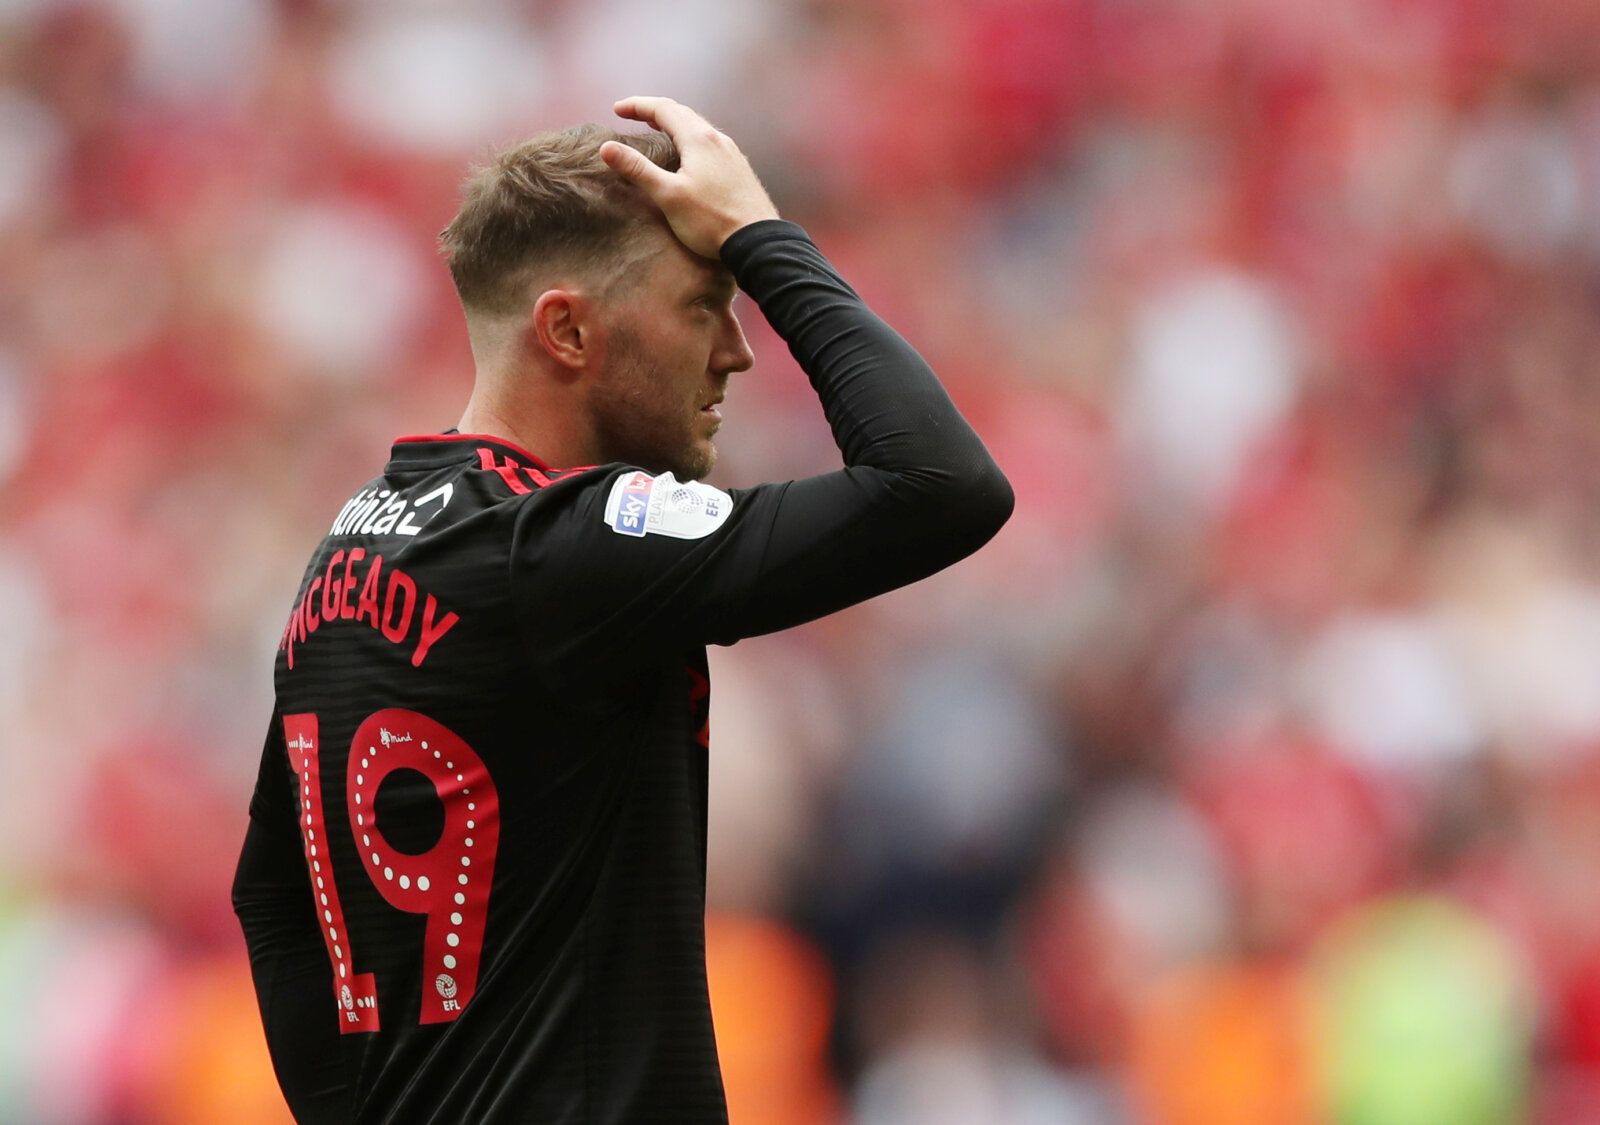 Soccer Football - League One Playoff Final - Sunderland v Charlton Athletic - Wembley Stadium, London, Britain - May 26, 2019  Sunderland's Aiden McGeady looks dejected after the match   Action Images/Lee Smith  EDITORIAL USE ONLY. No use with unauthorized audio, video, data, fixture lists, club/league logos or 